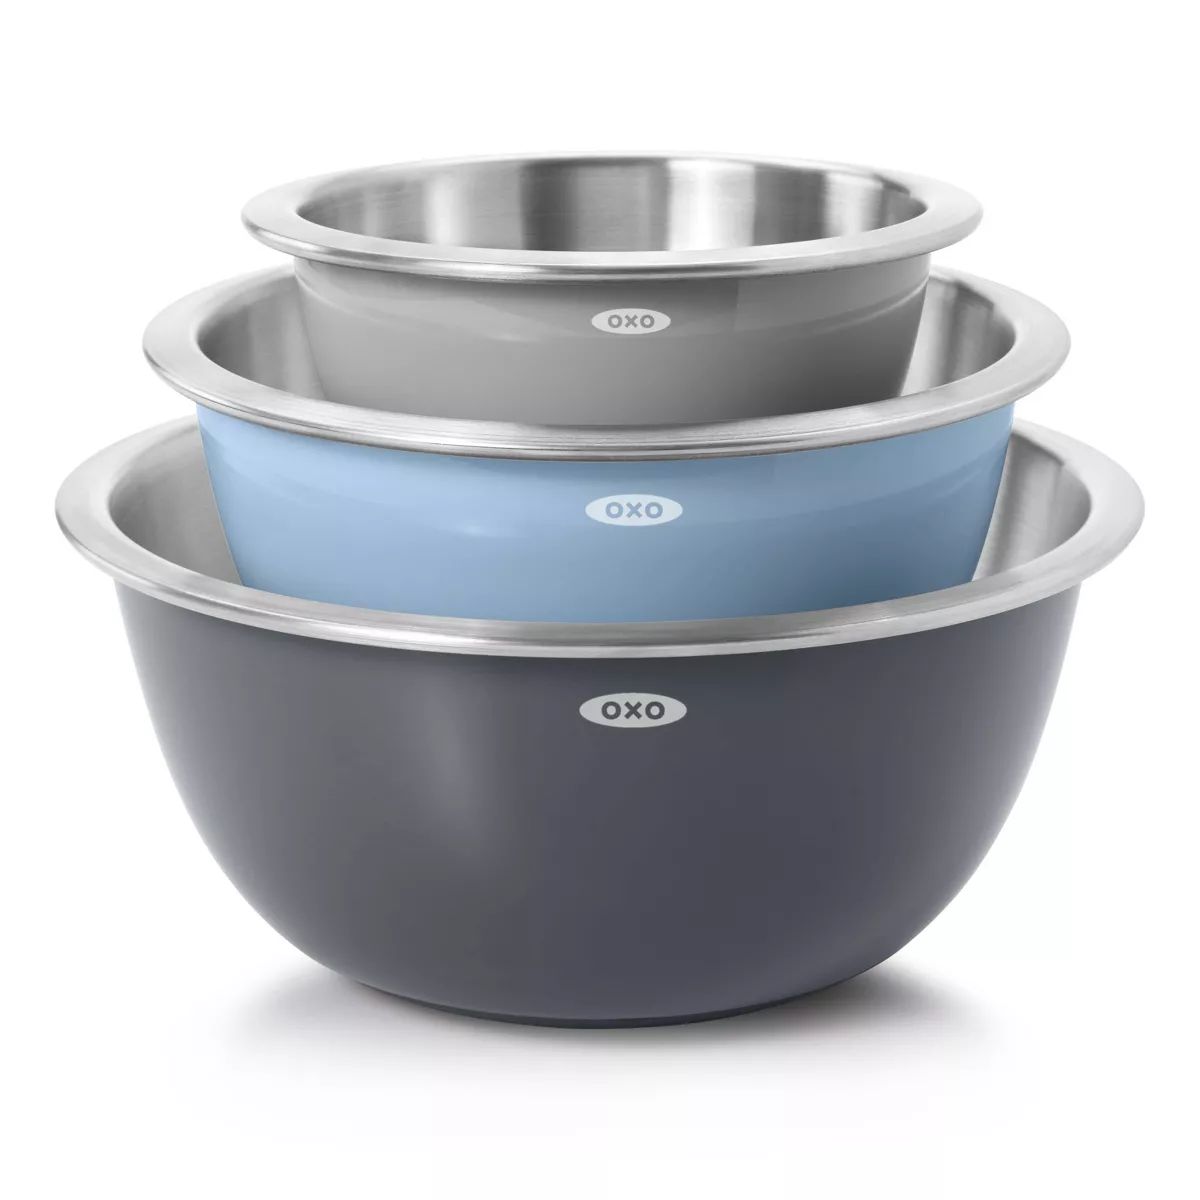 OXO 3pc Insulated Stainless Steel Mixing Bowl Set - Gray | Target